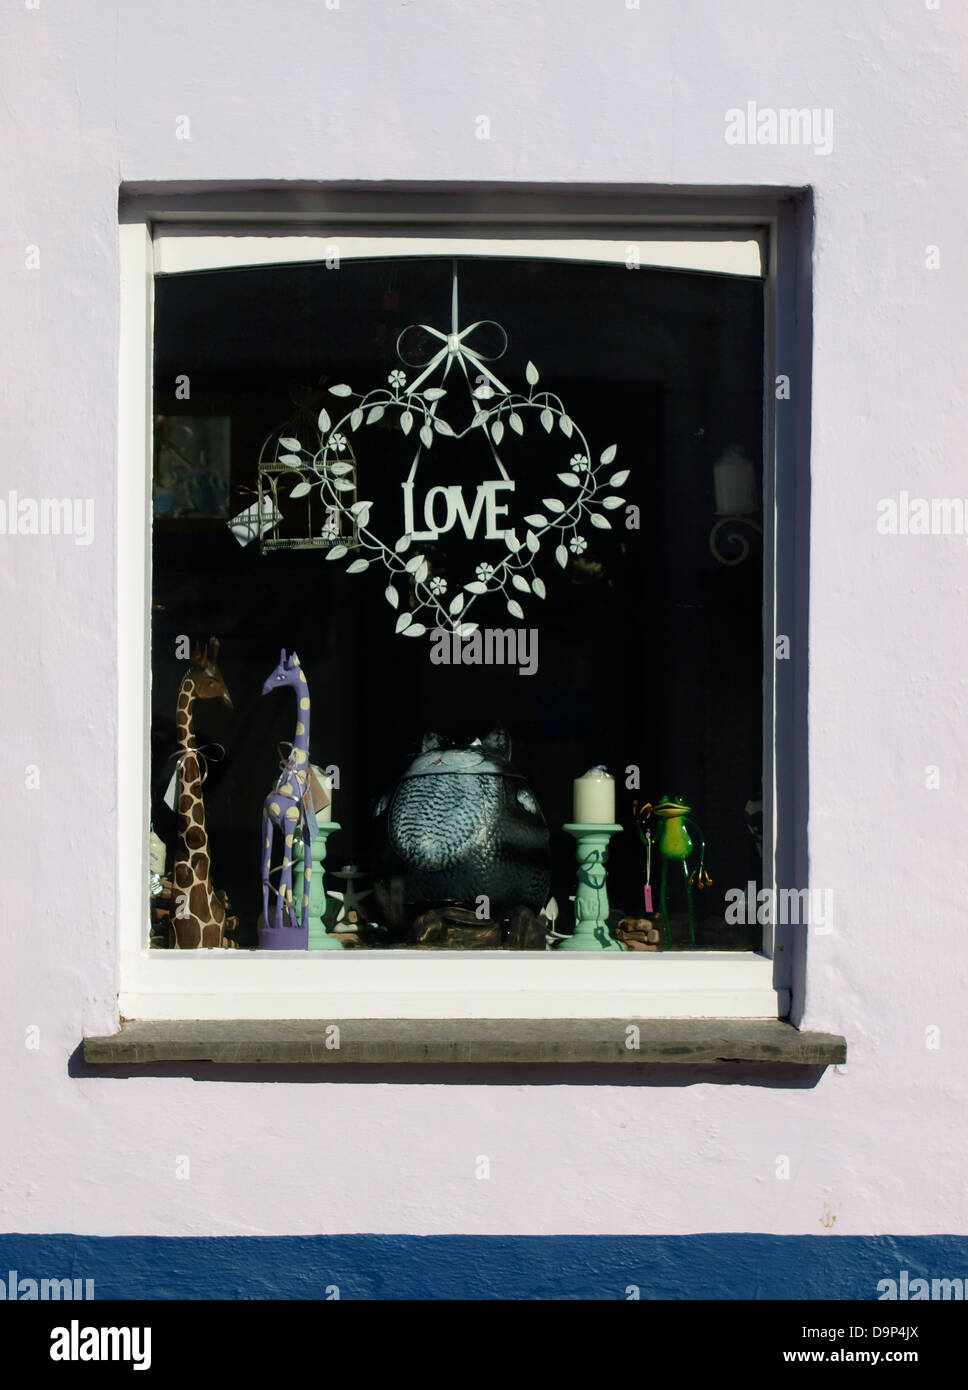 Love sign in a shop window, UK 2013 Stock Photo